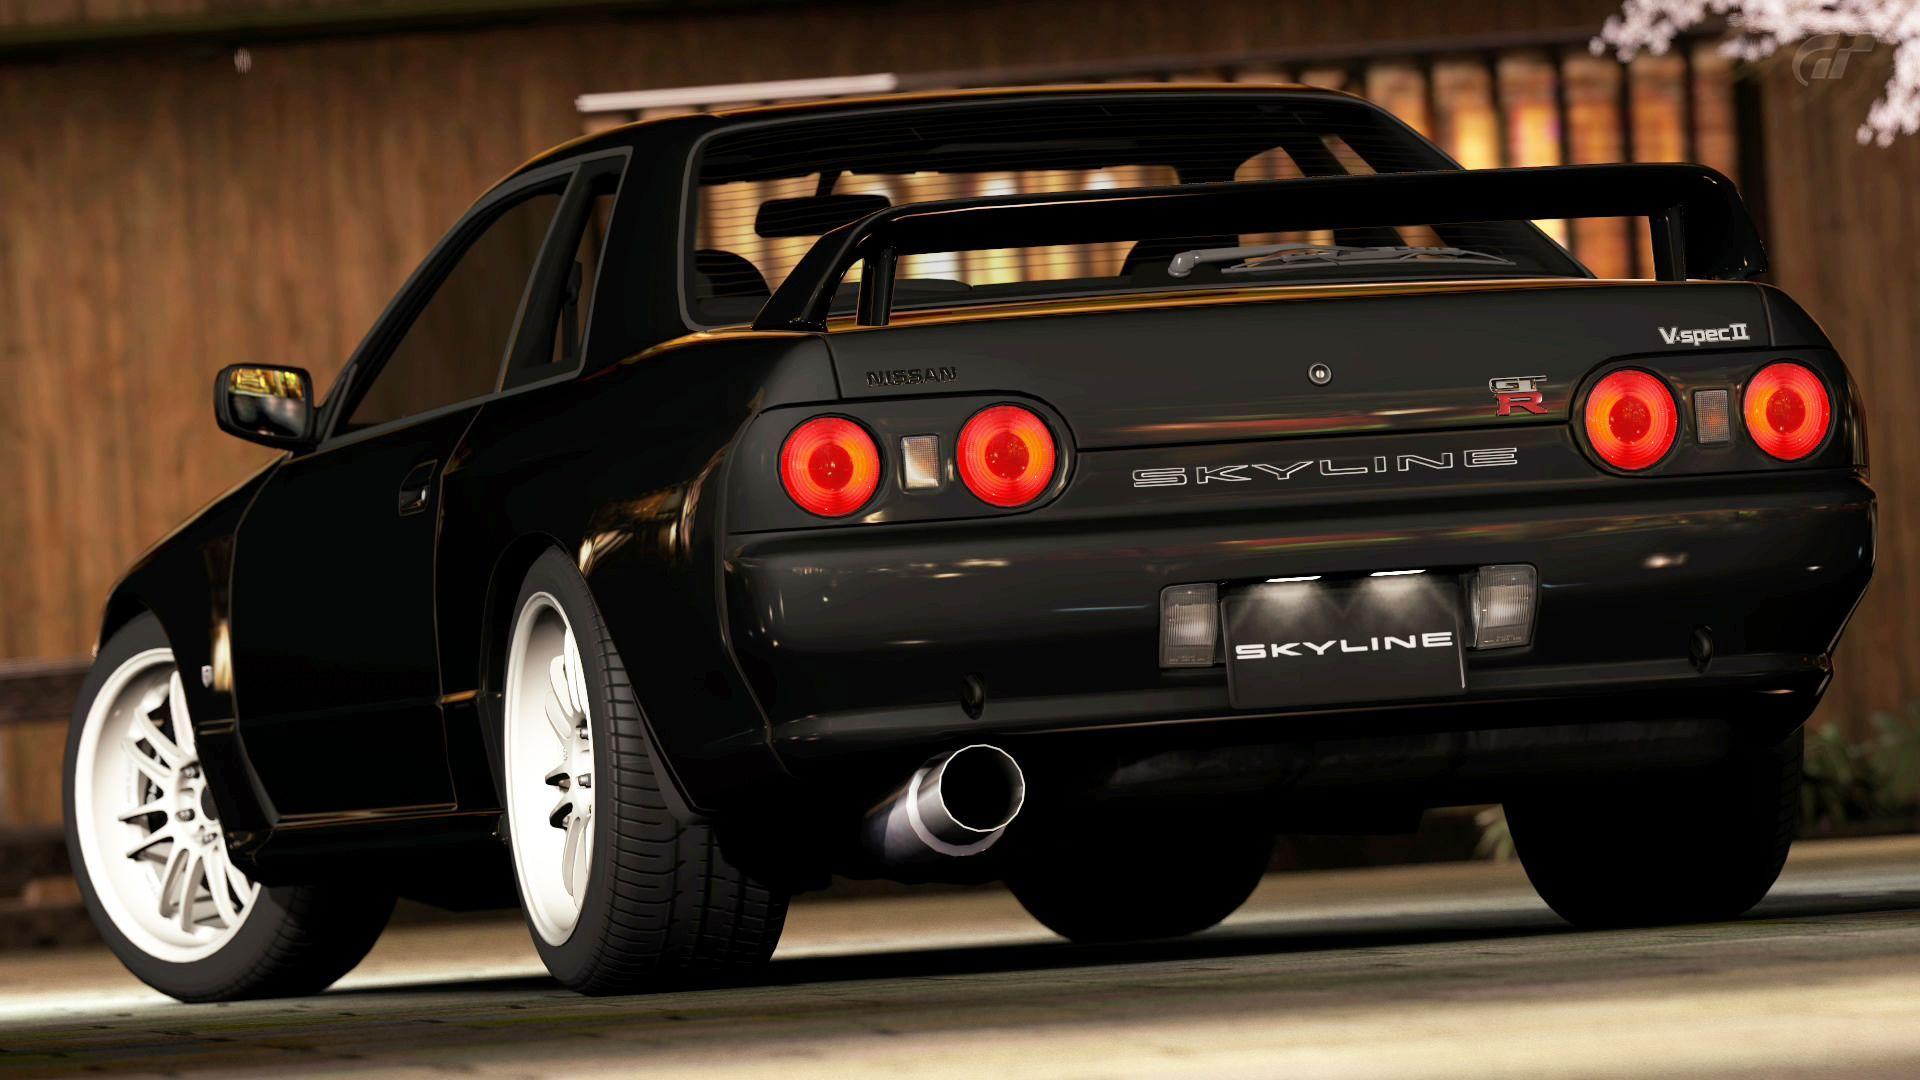 R32 Wallpapers Top Free R32 Backgrounds Wallpaperaccess